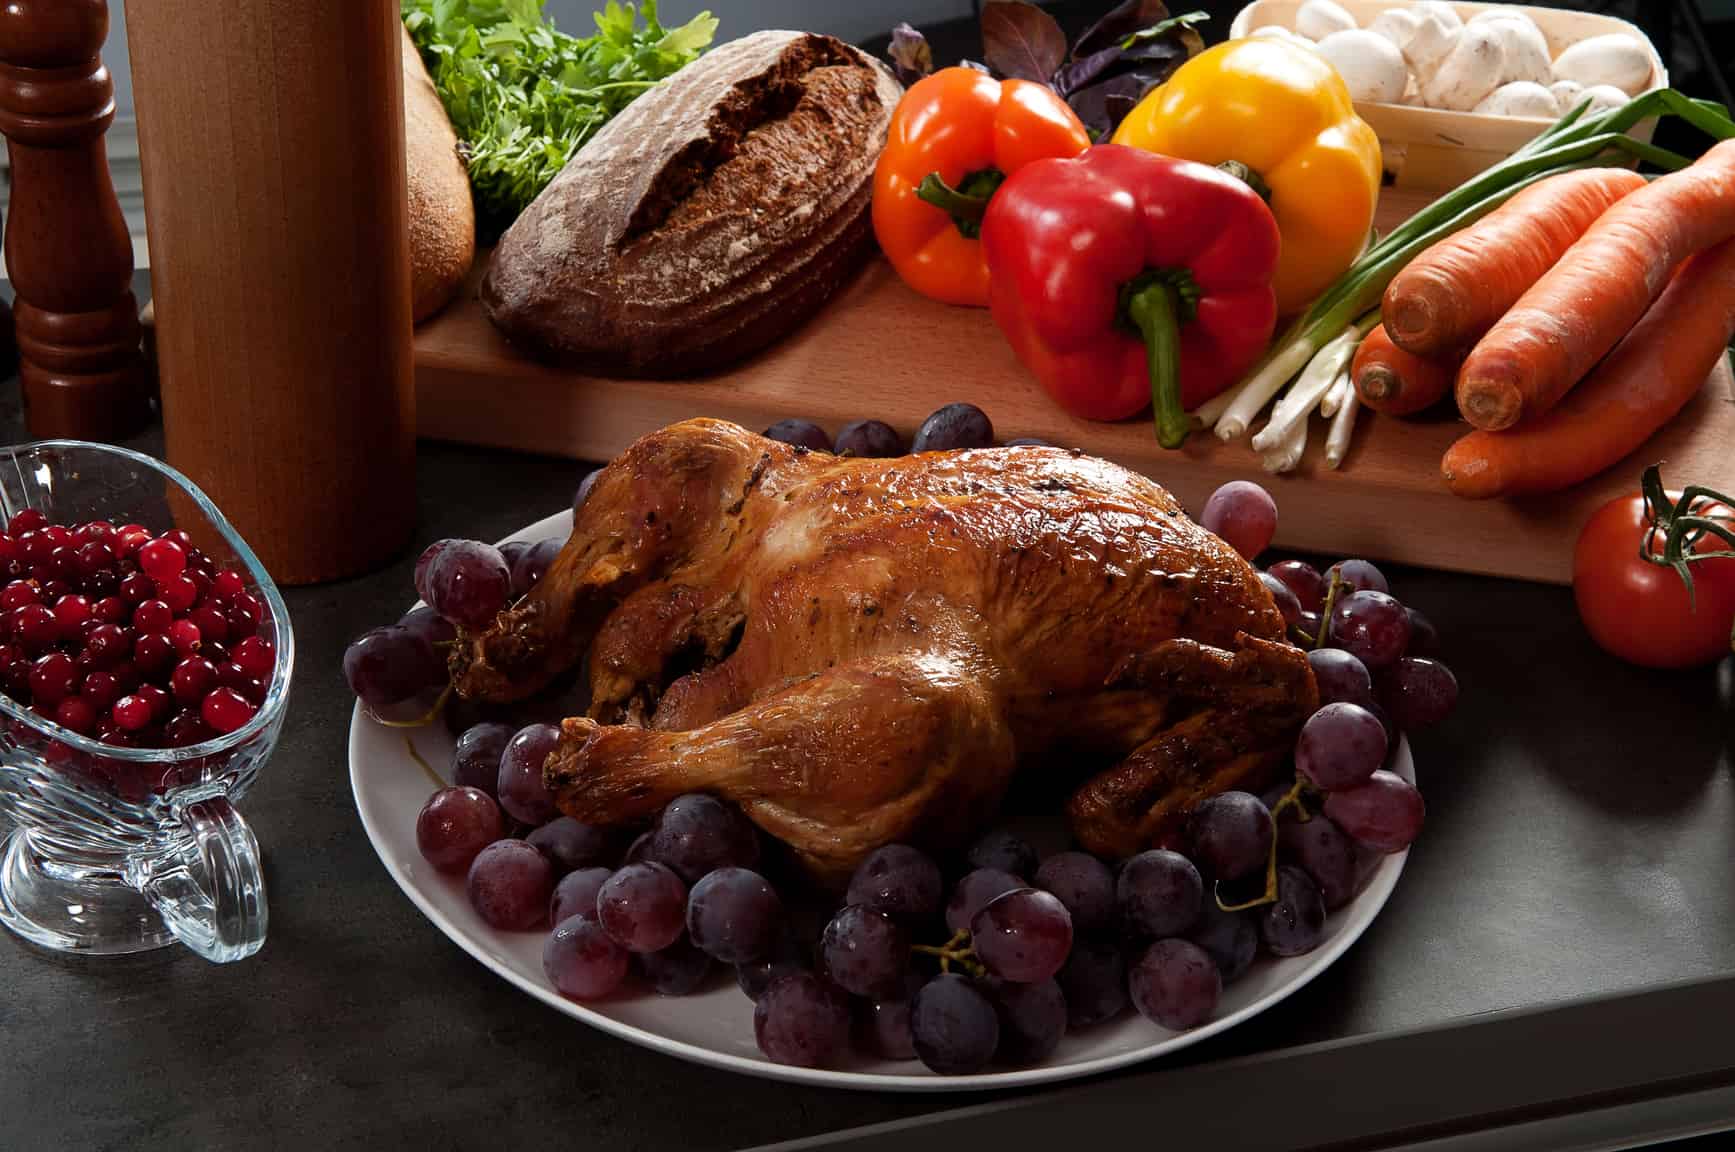 Roasted holiday turkey garnished with sourdough stuffing and fruit